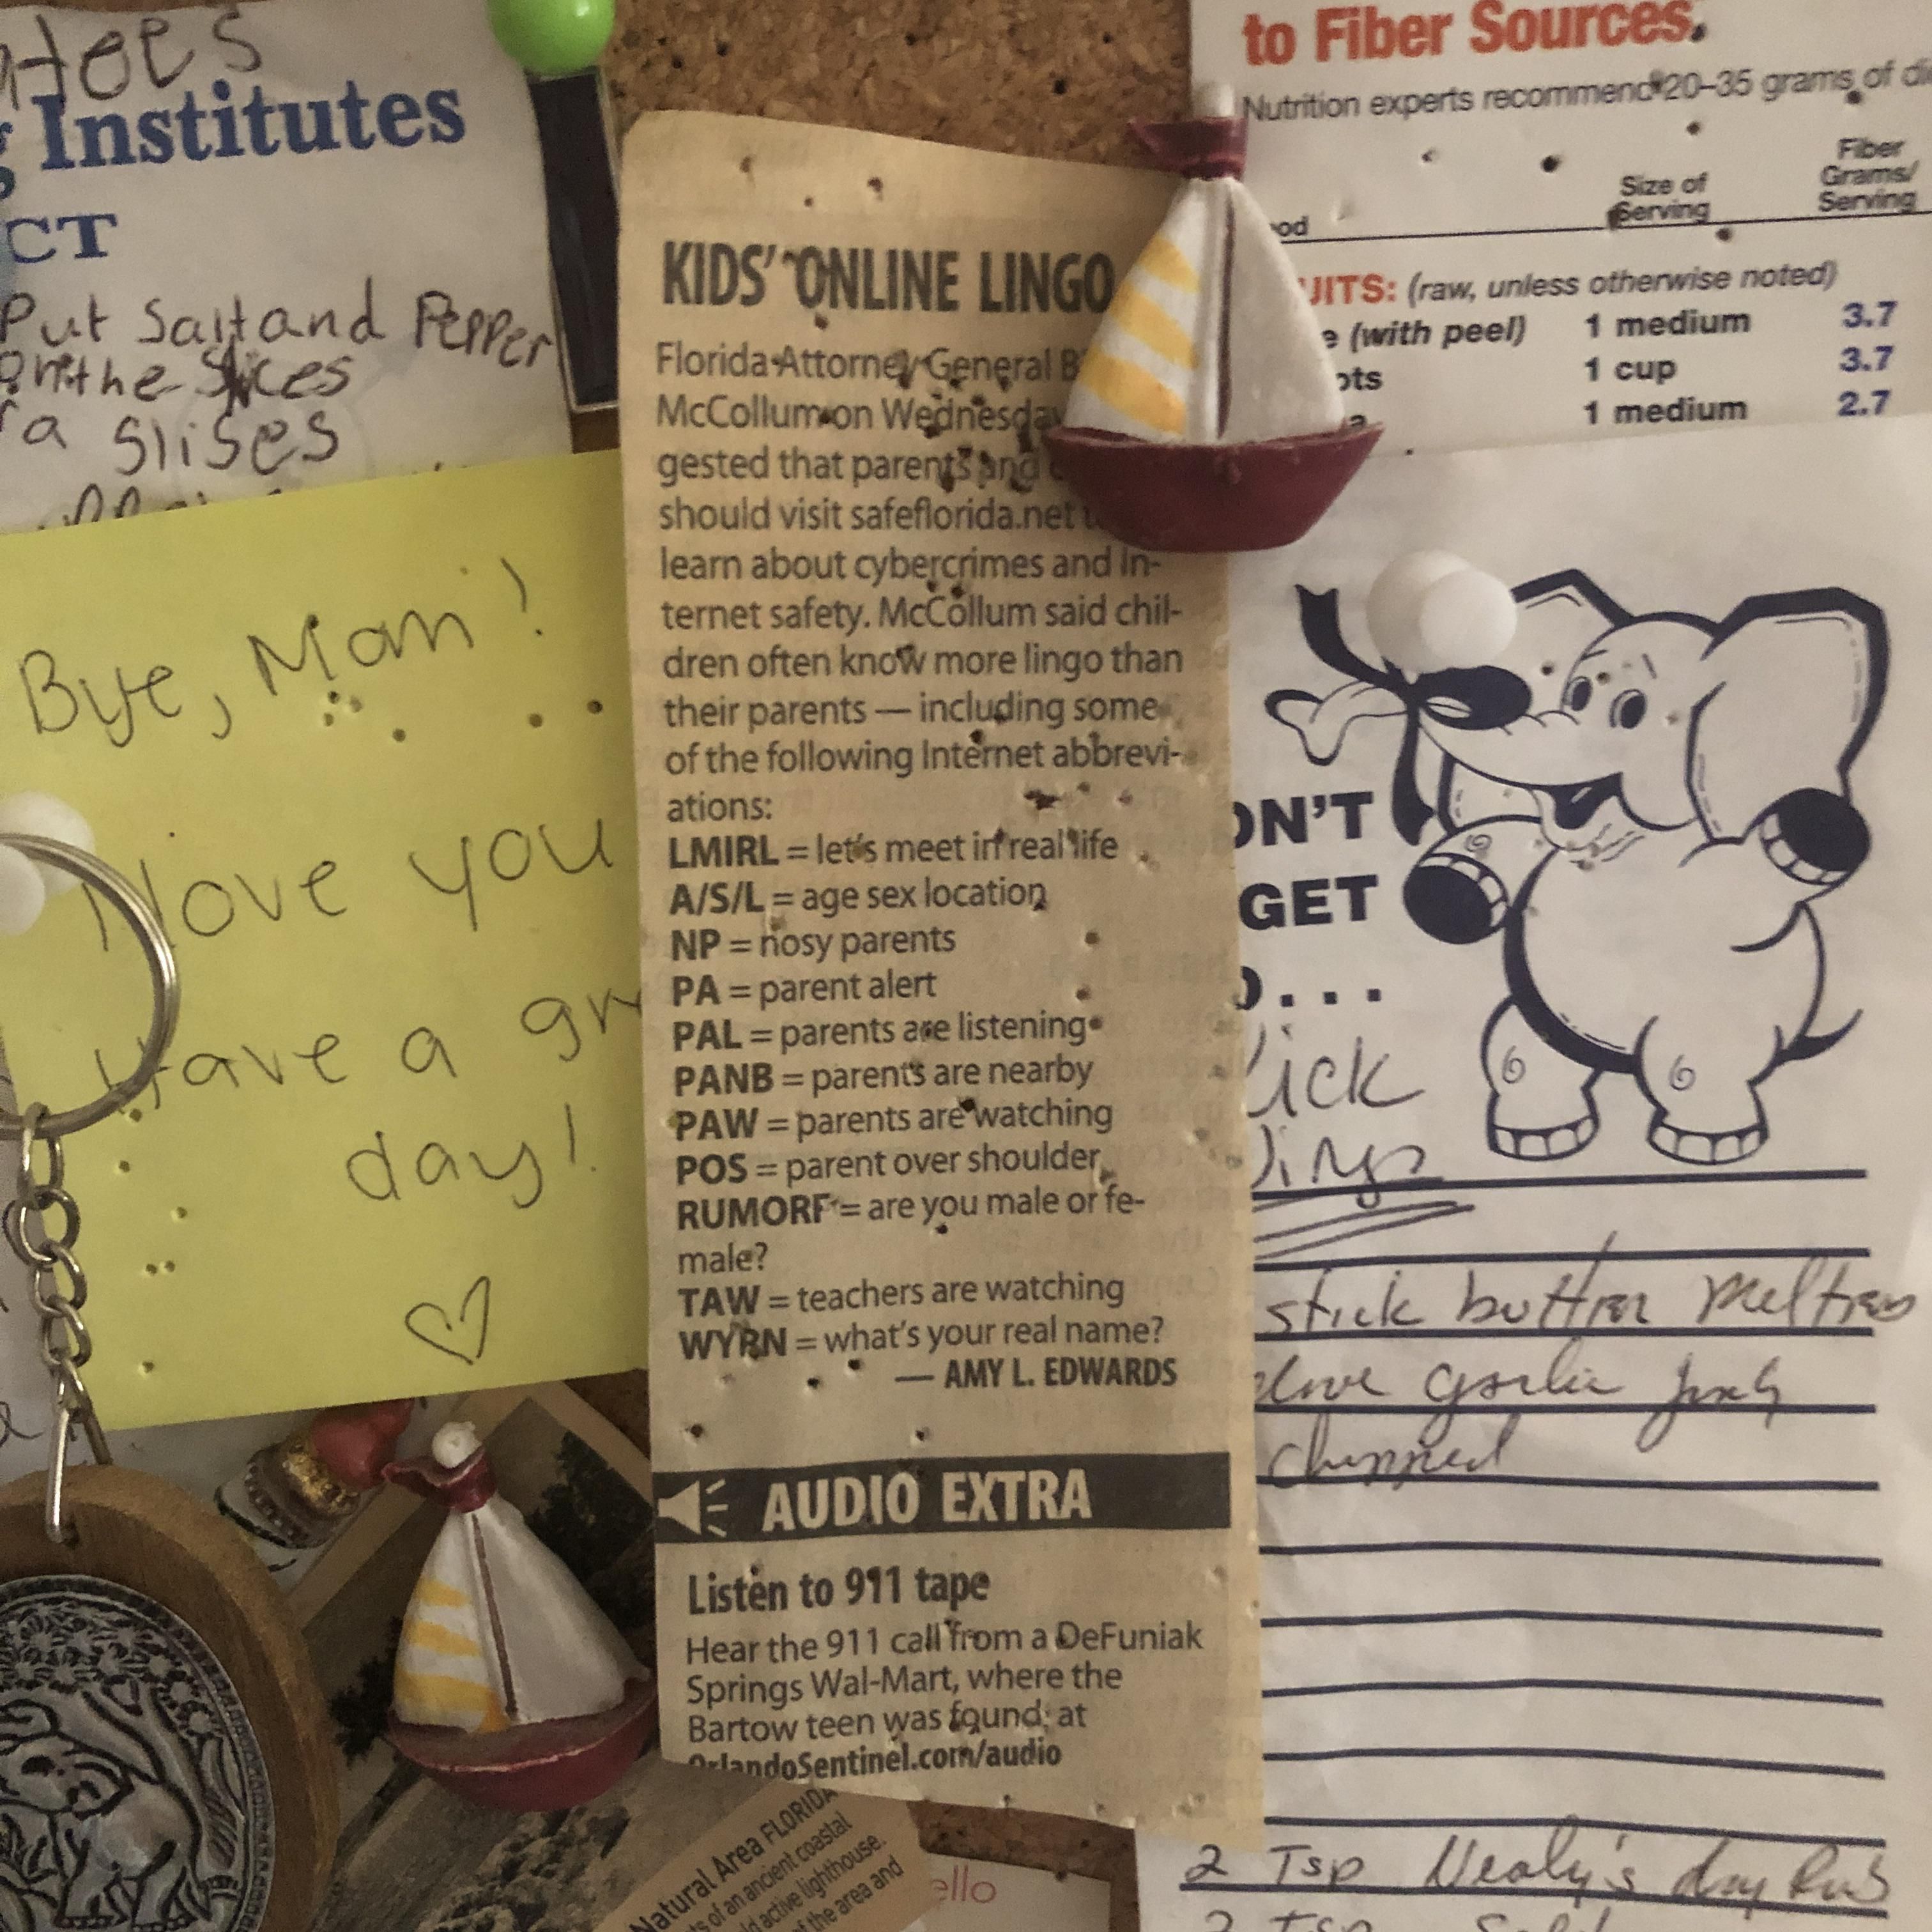 My mom has had this newspaper clipping pinned to the cork board in her kitchen since I was 12. I am now 26.